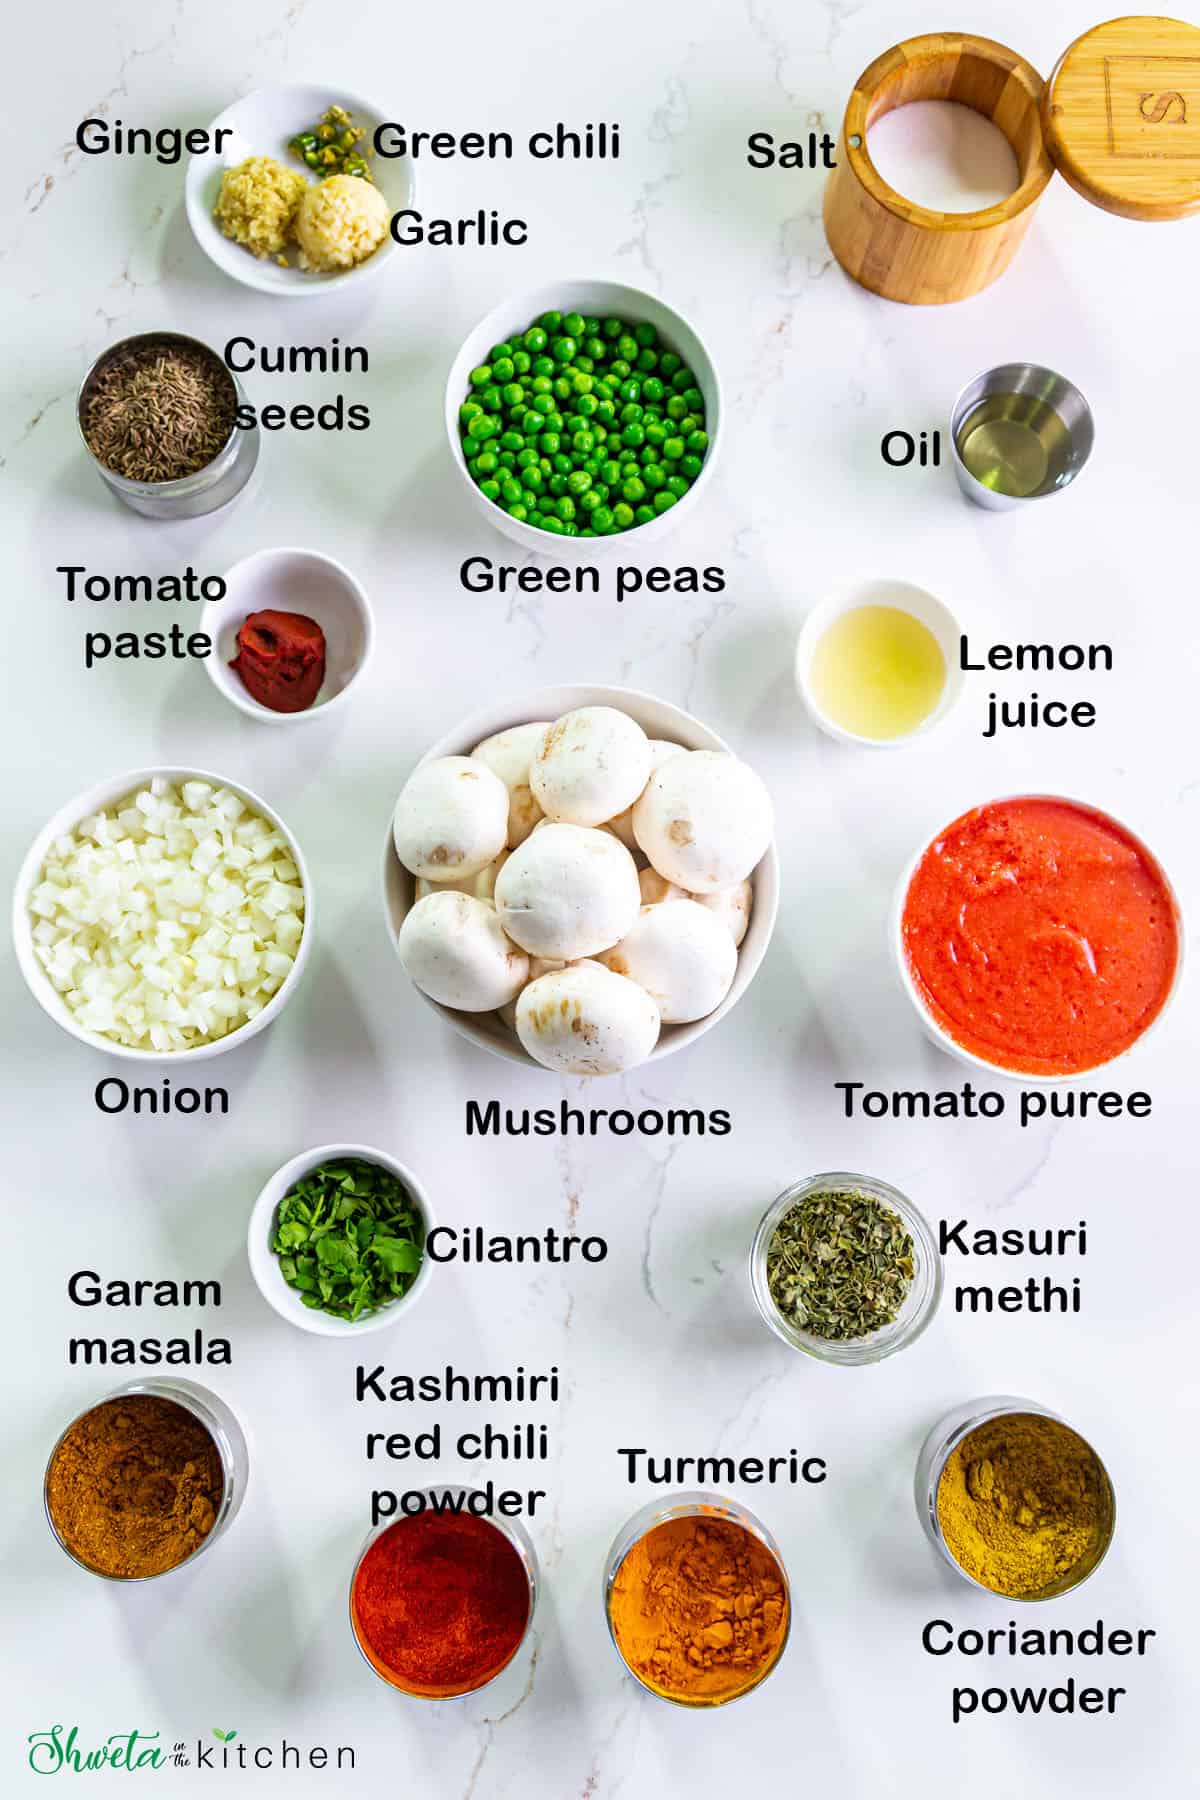 Ingredients for Mushroom matar placed in bowls on white surface